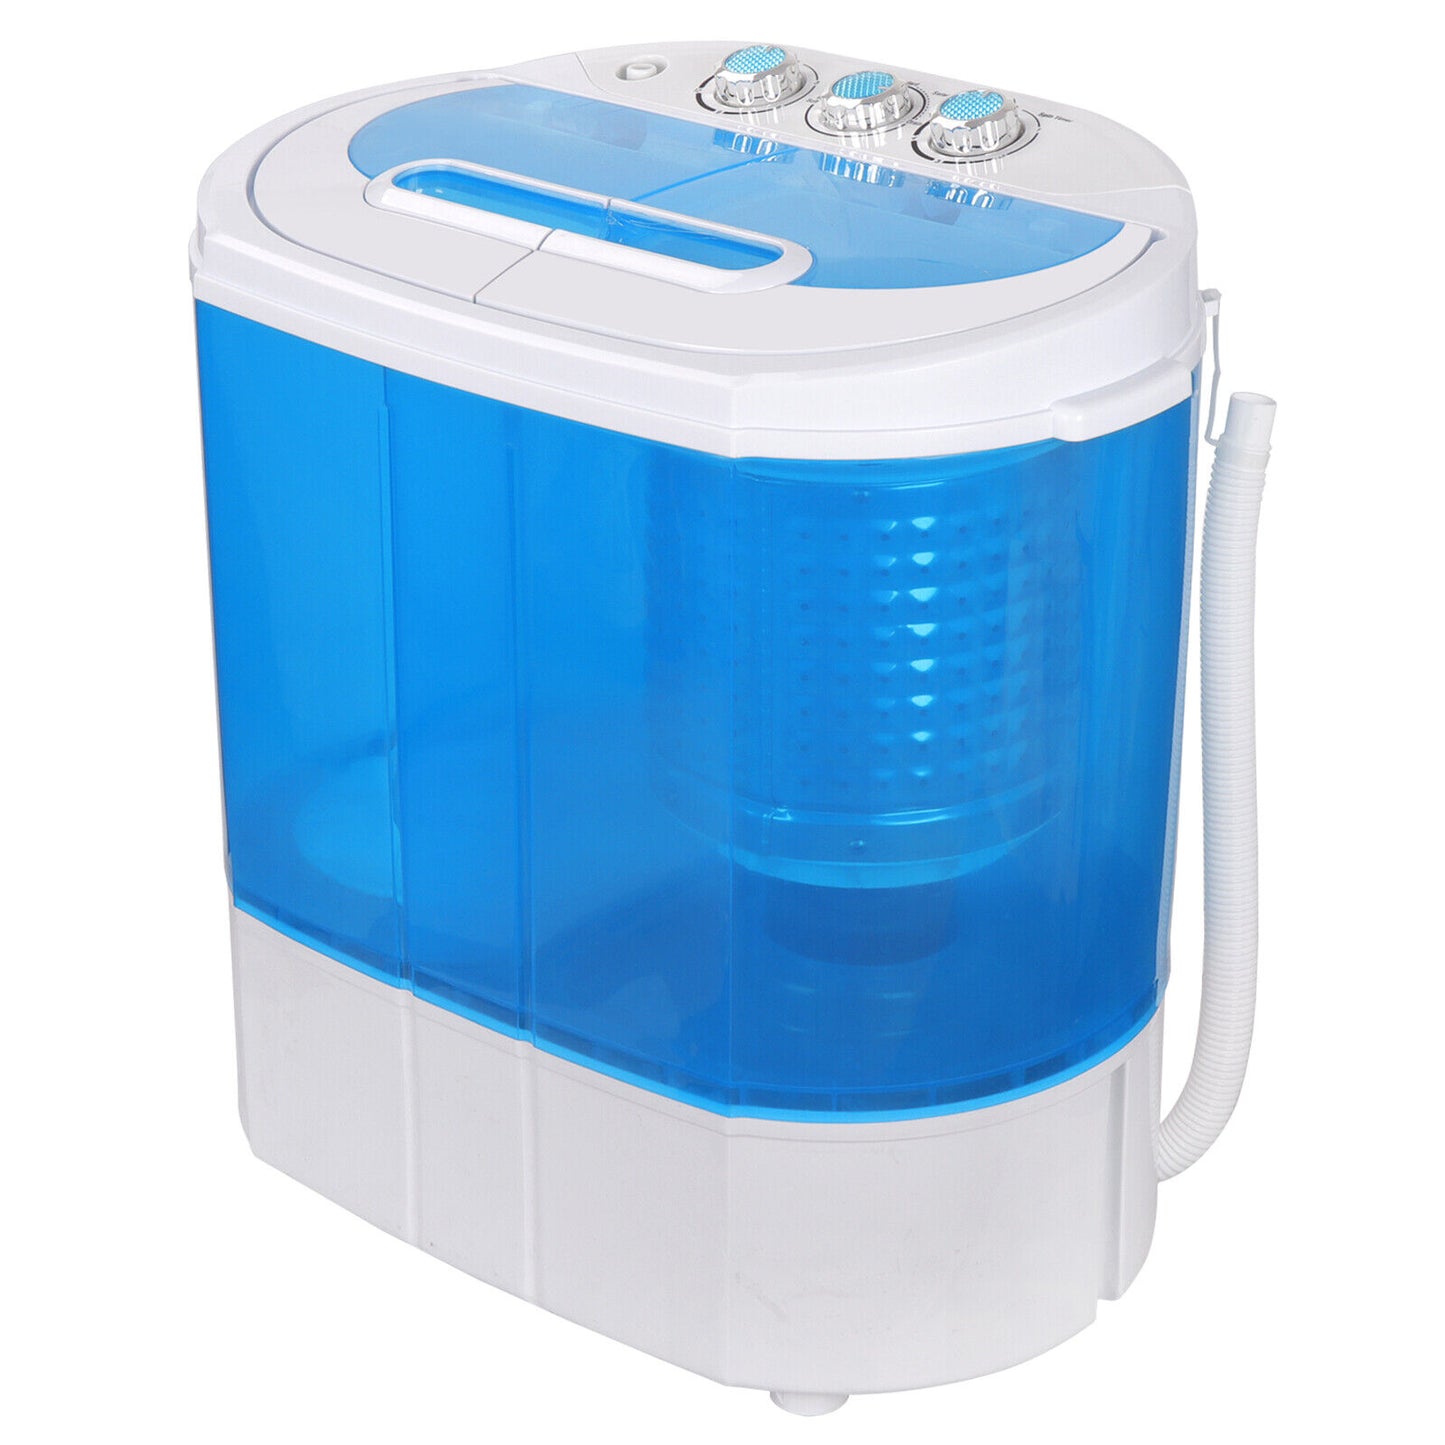 Portable Compact Washing Machine 10lbs Twin Tub Washer Spin Dryer Gravity Drain